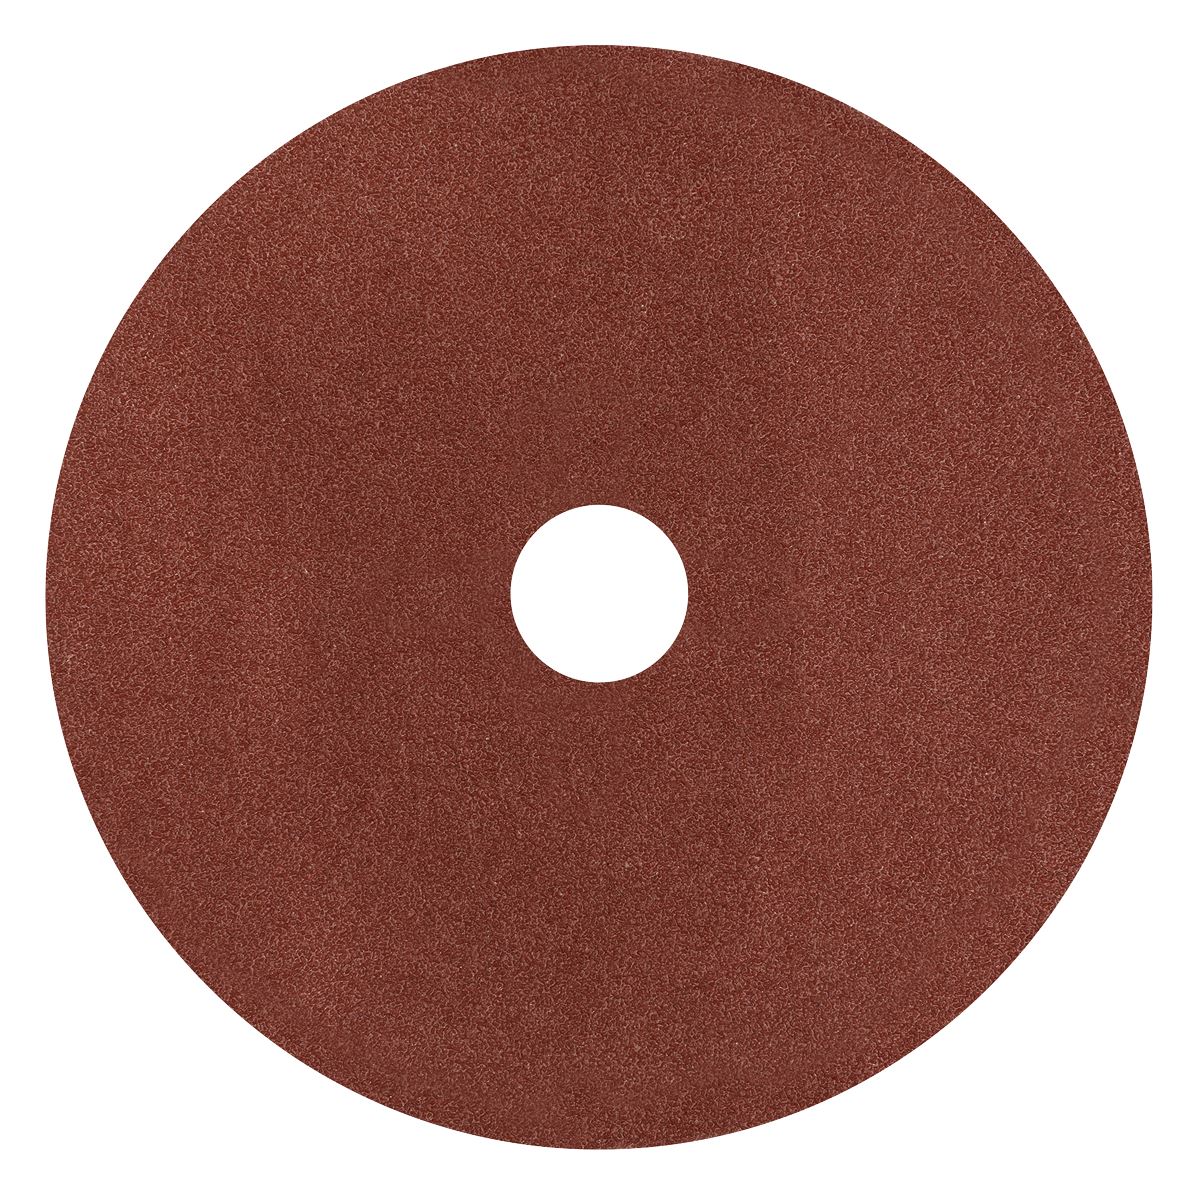 Worksafe by Sealey Fibre Backed Disc Ø115mm - 60Grit Pack of 25